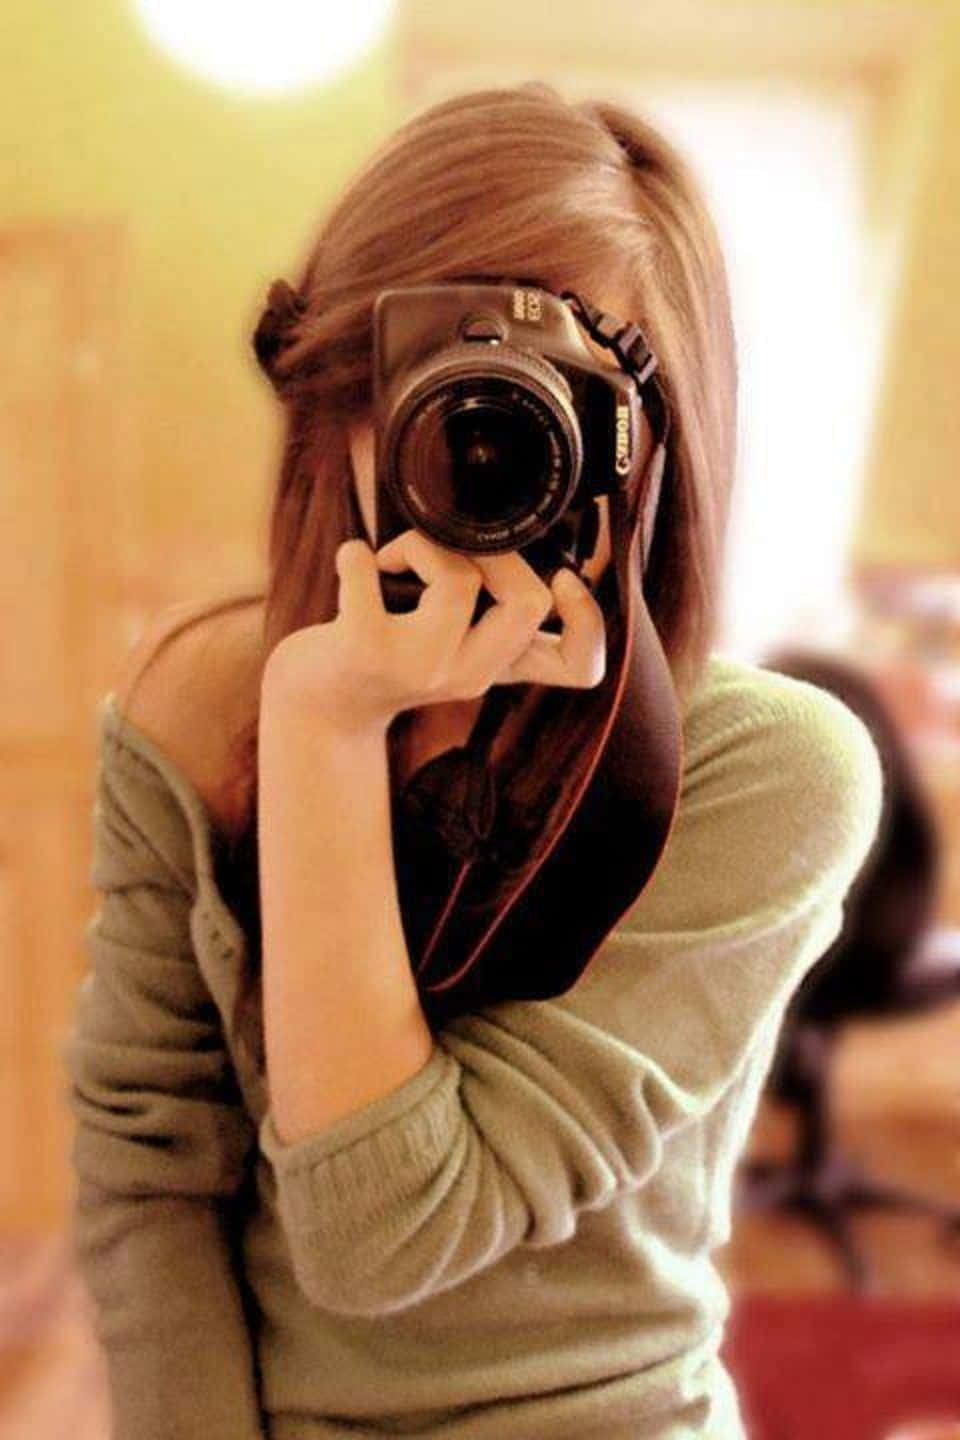 Cute Woman Profile With A Face Camera Wallpaper